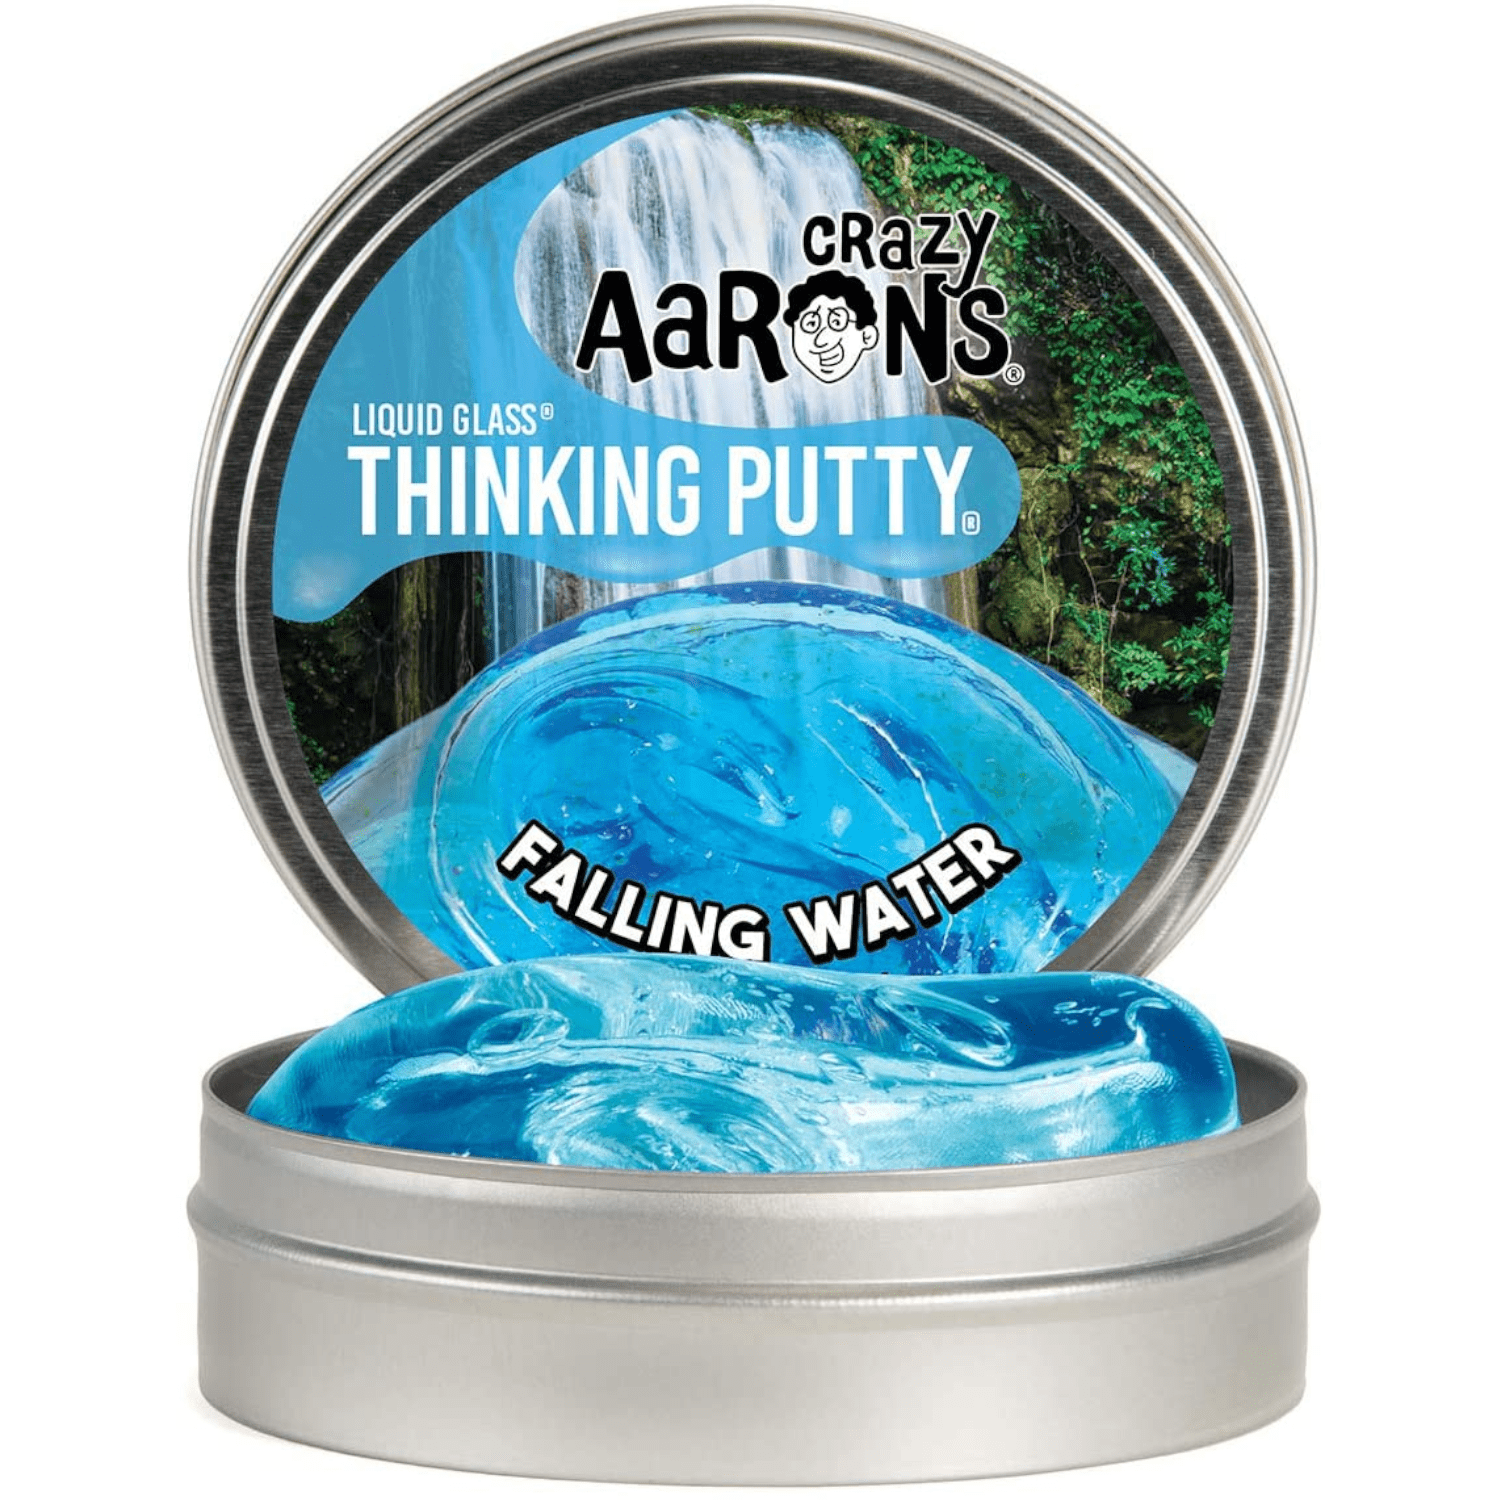 Festival of Lights Crazy Cosmic Aaron's Thinking Putty